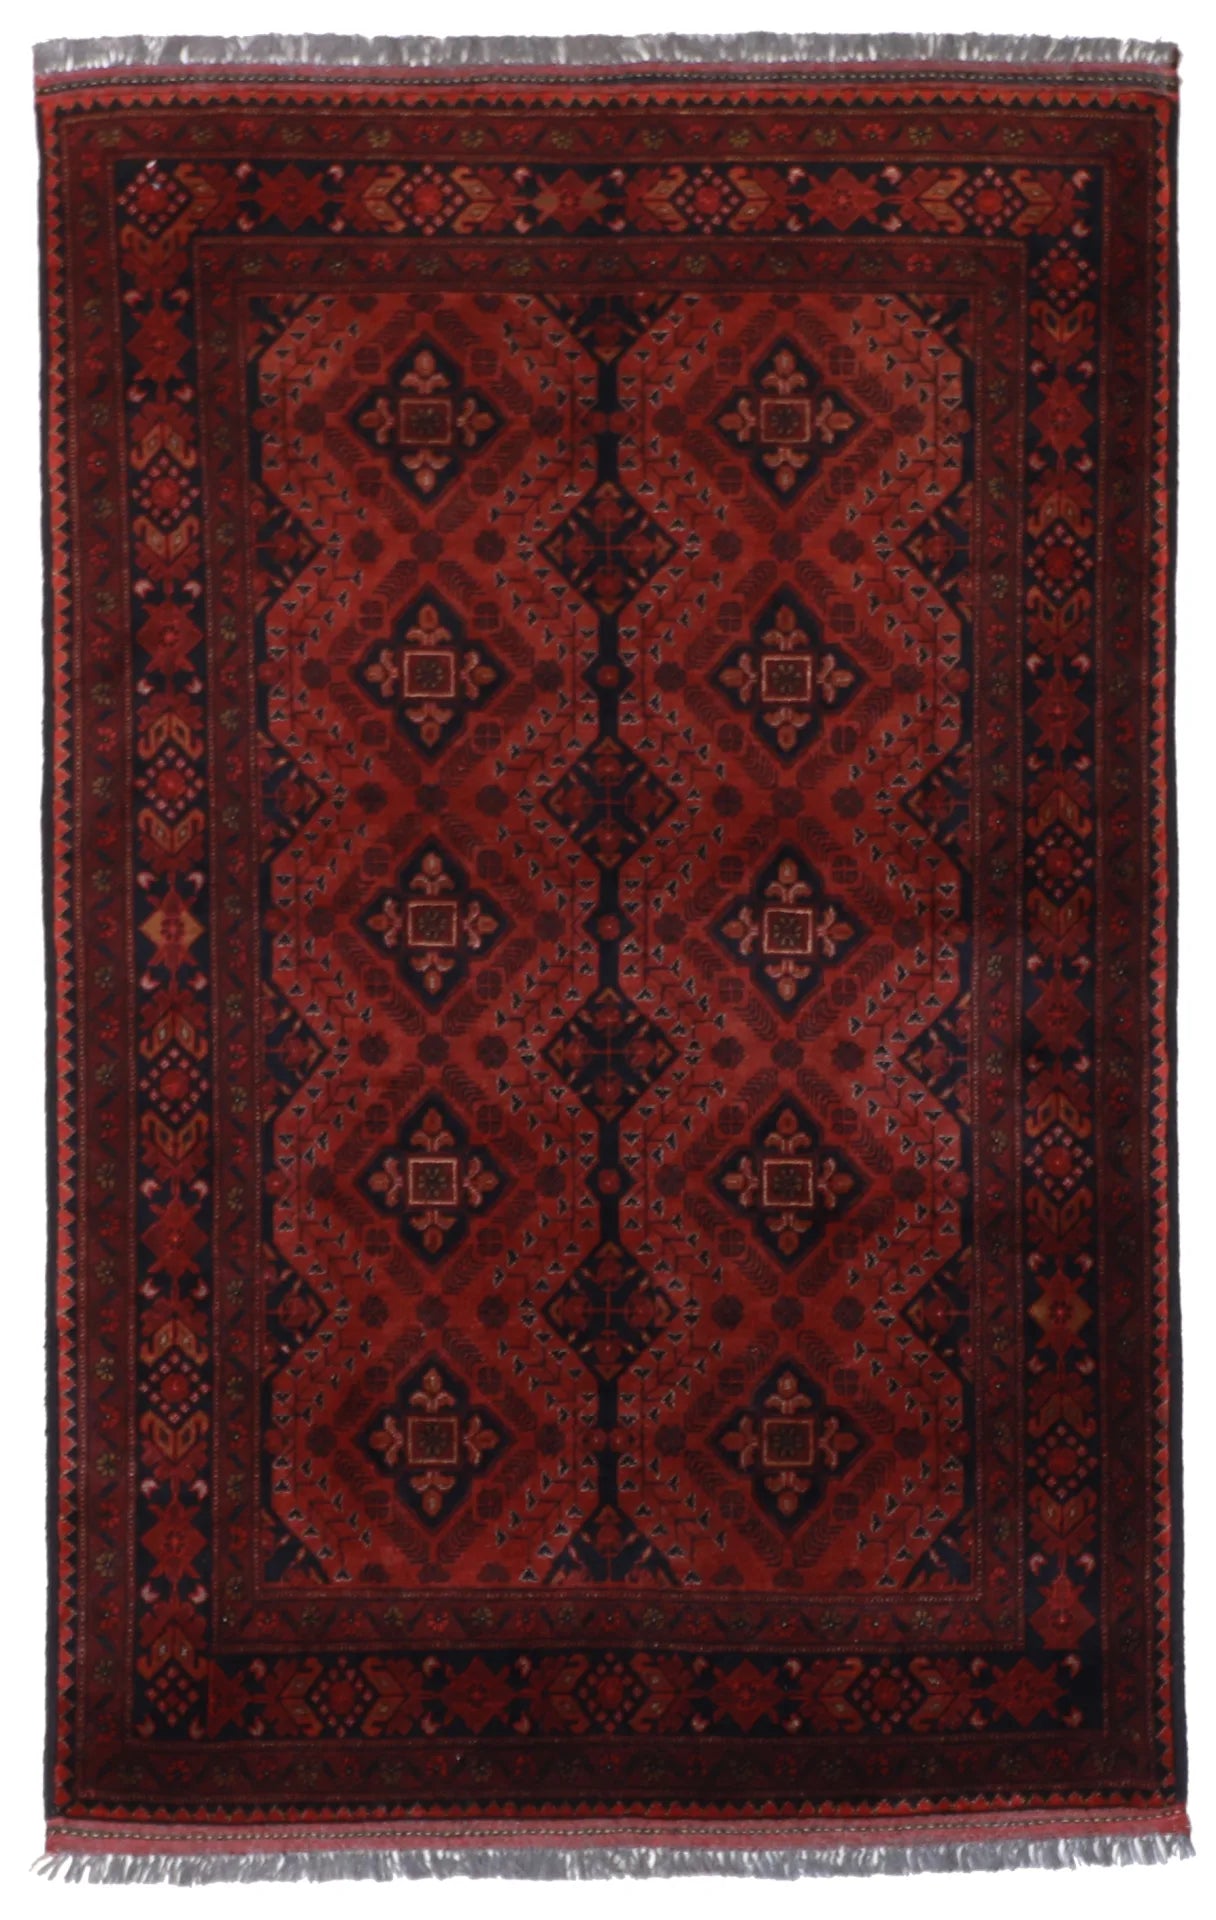 4.1x6 - Khan Mohamadie Fine/Wool All Over Rectangle - Hand Knotted Rug